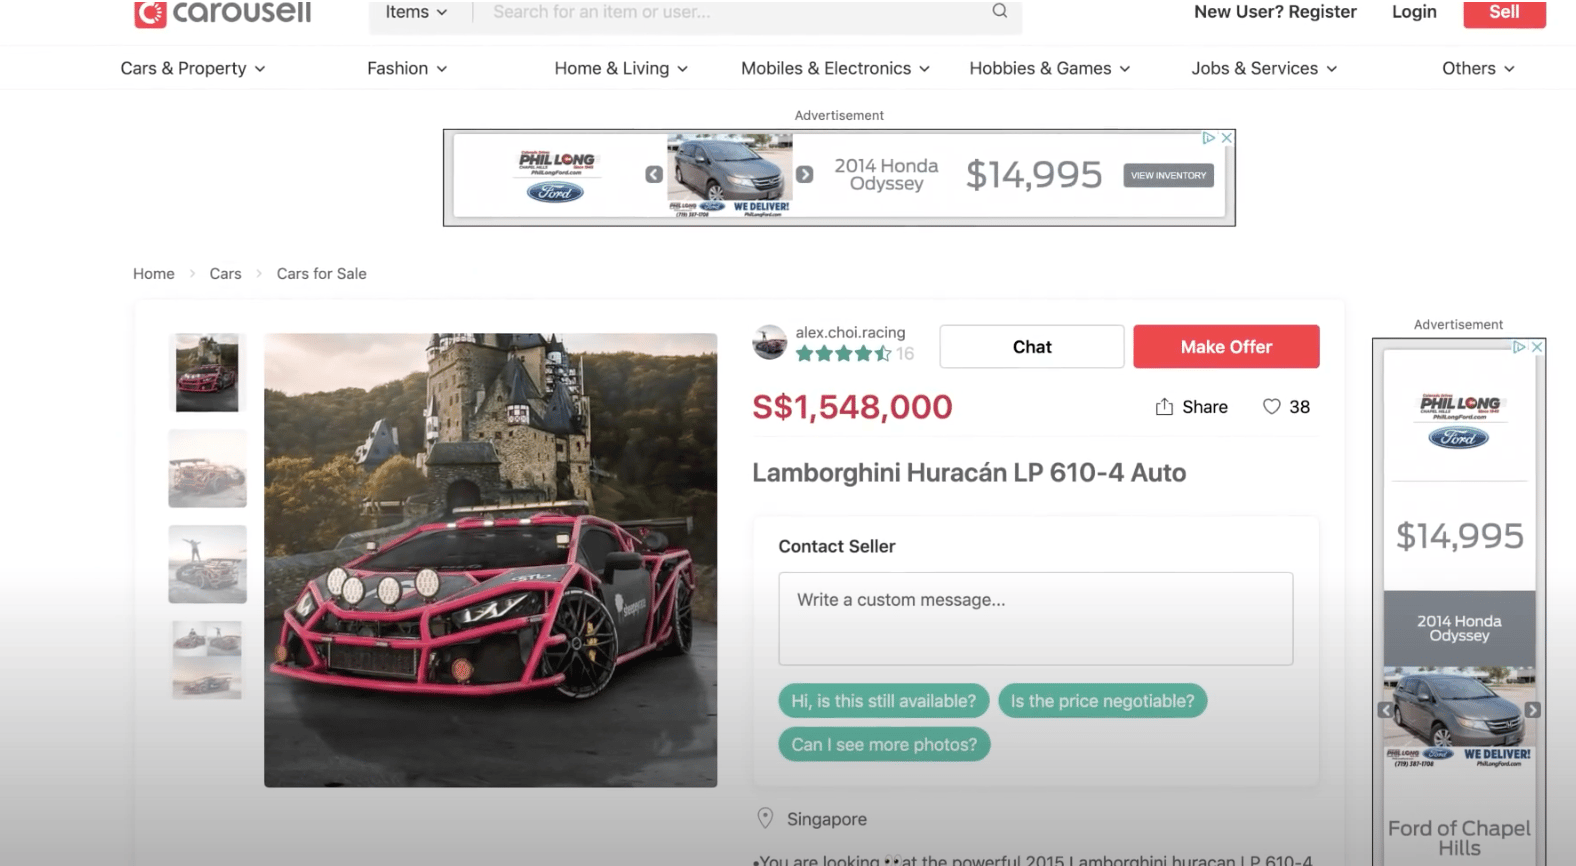 Carousell account tries to sell Alex Choi's Huracan